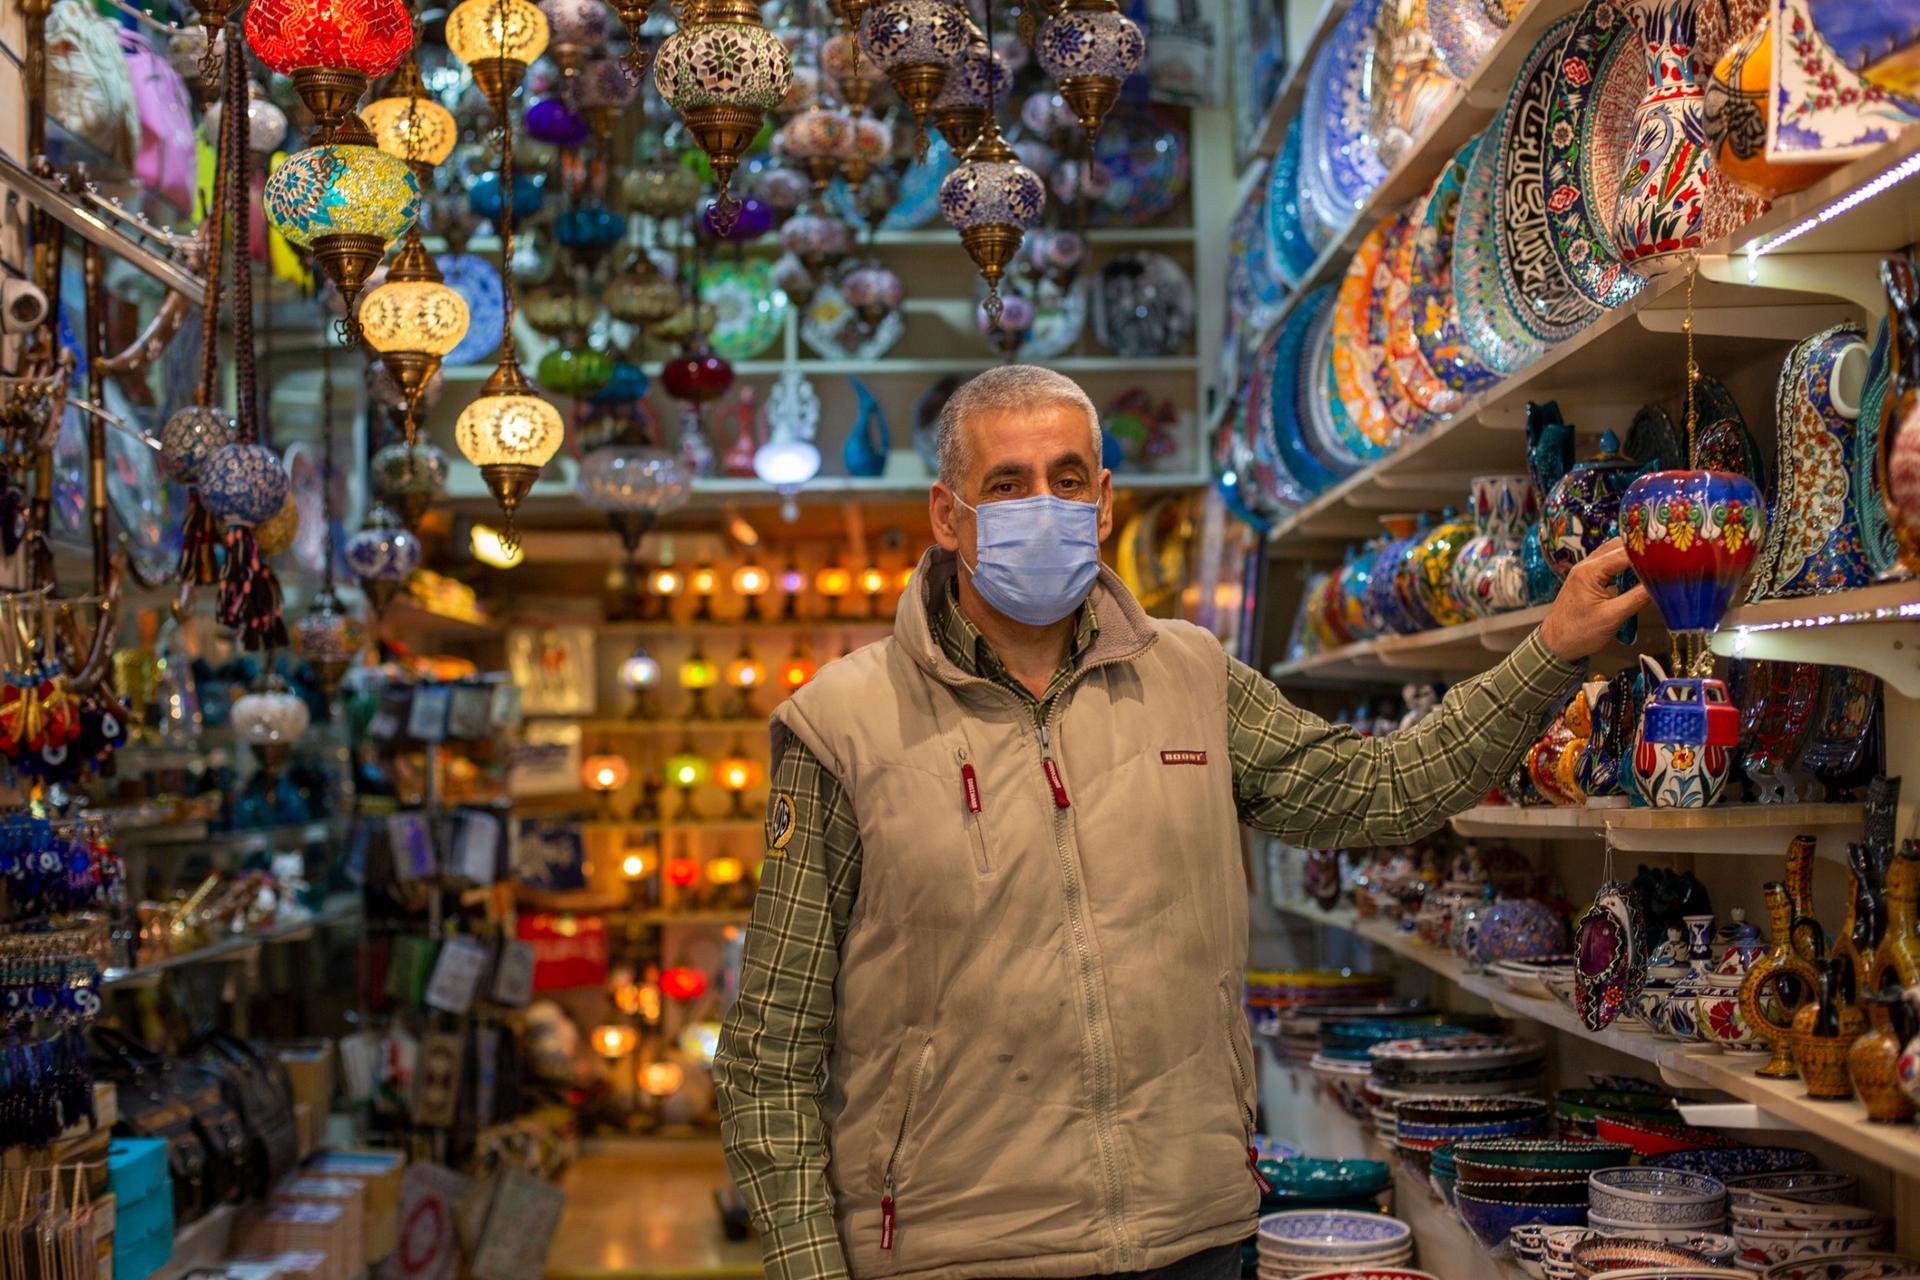 A man is shown wearing a face mask and khaki vest while standing in an aisle with colorful lamps.